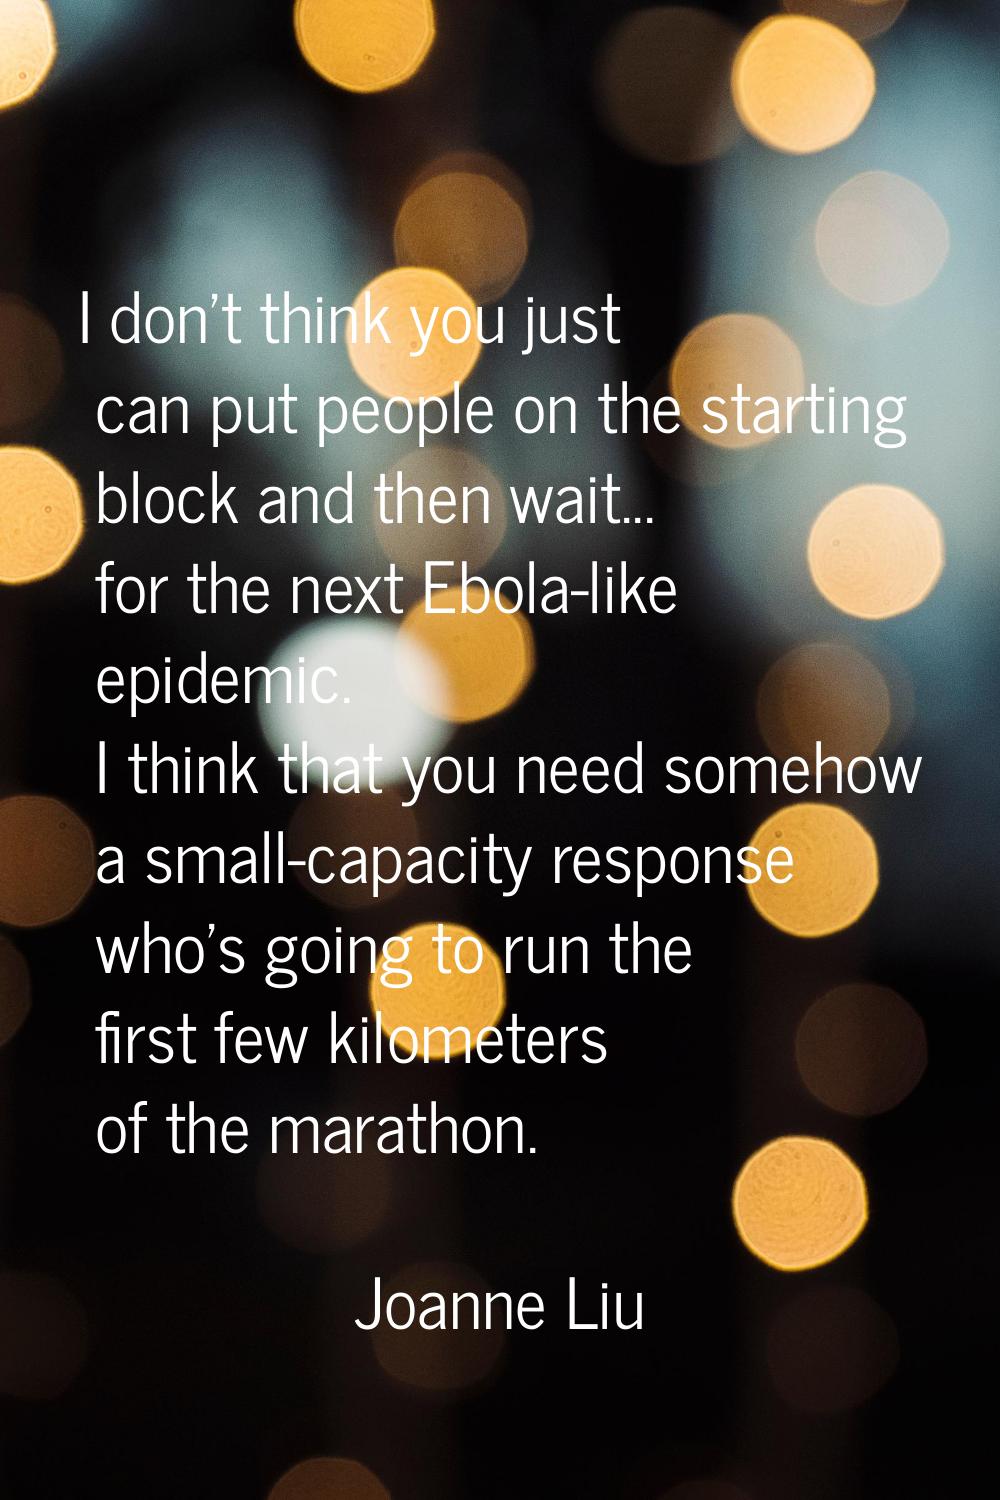 I don't think you just can put people on the starting block and then wait... for the next Ebola-lik